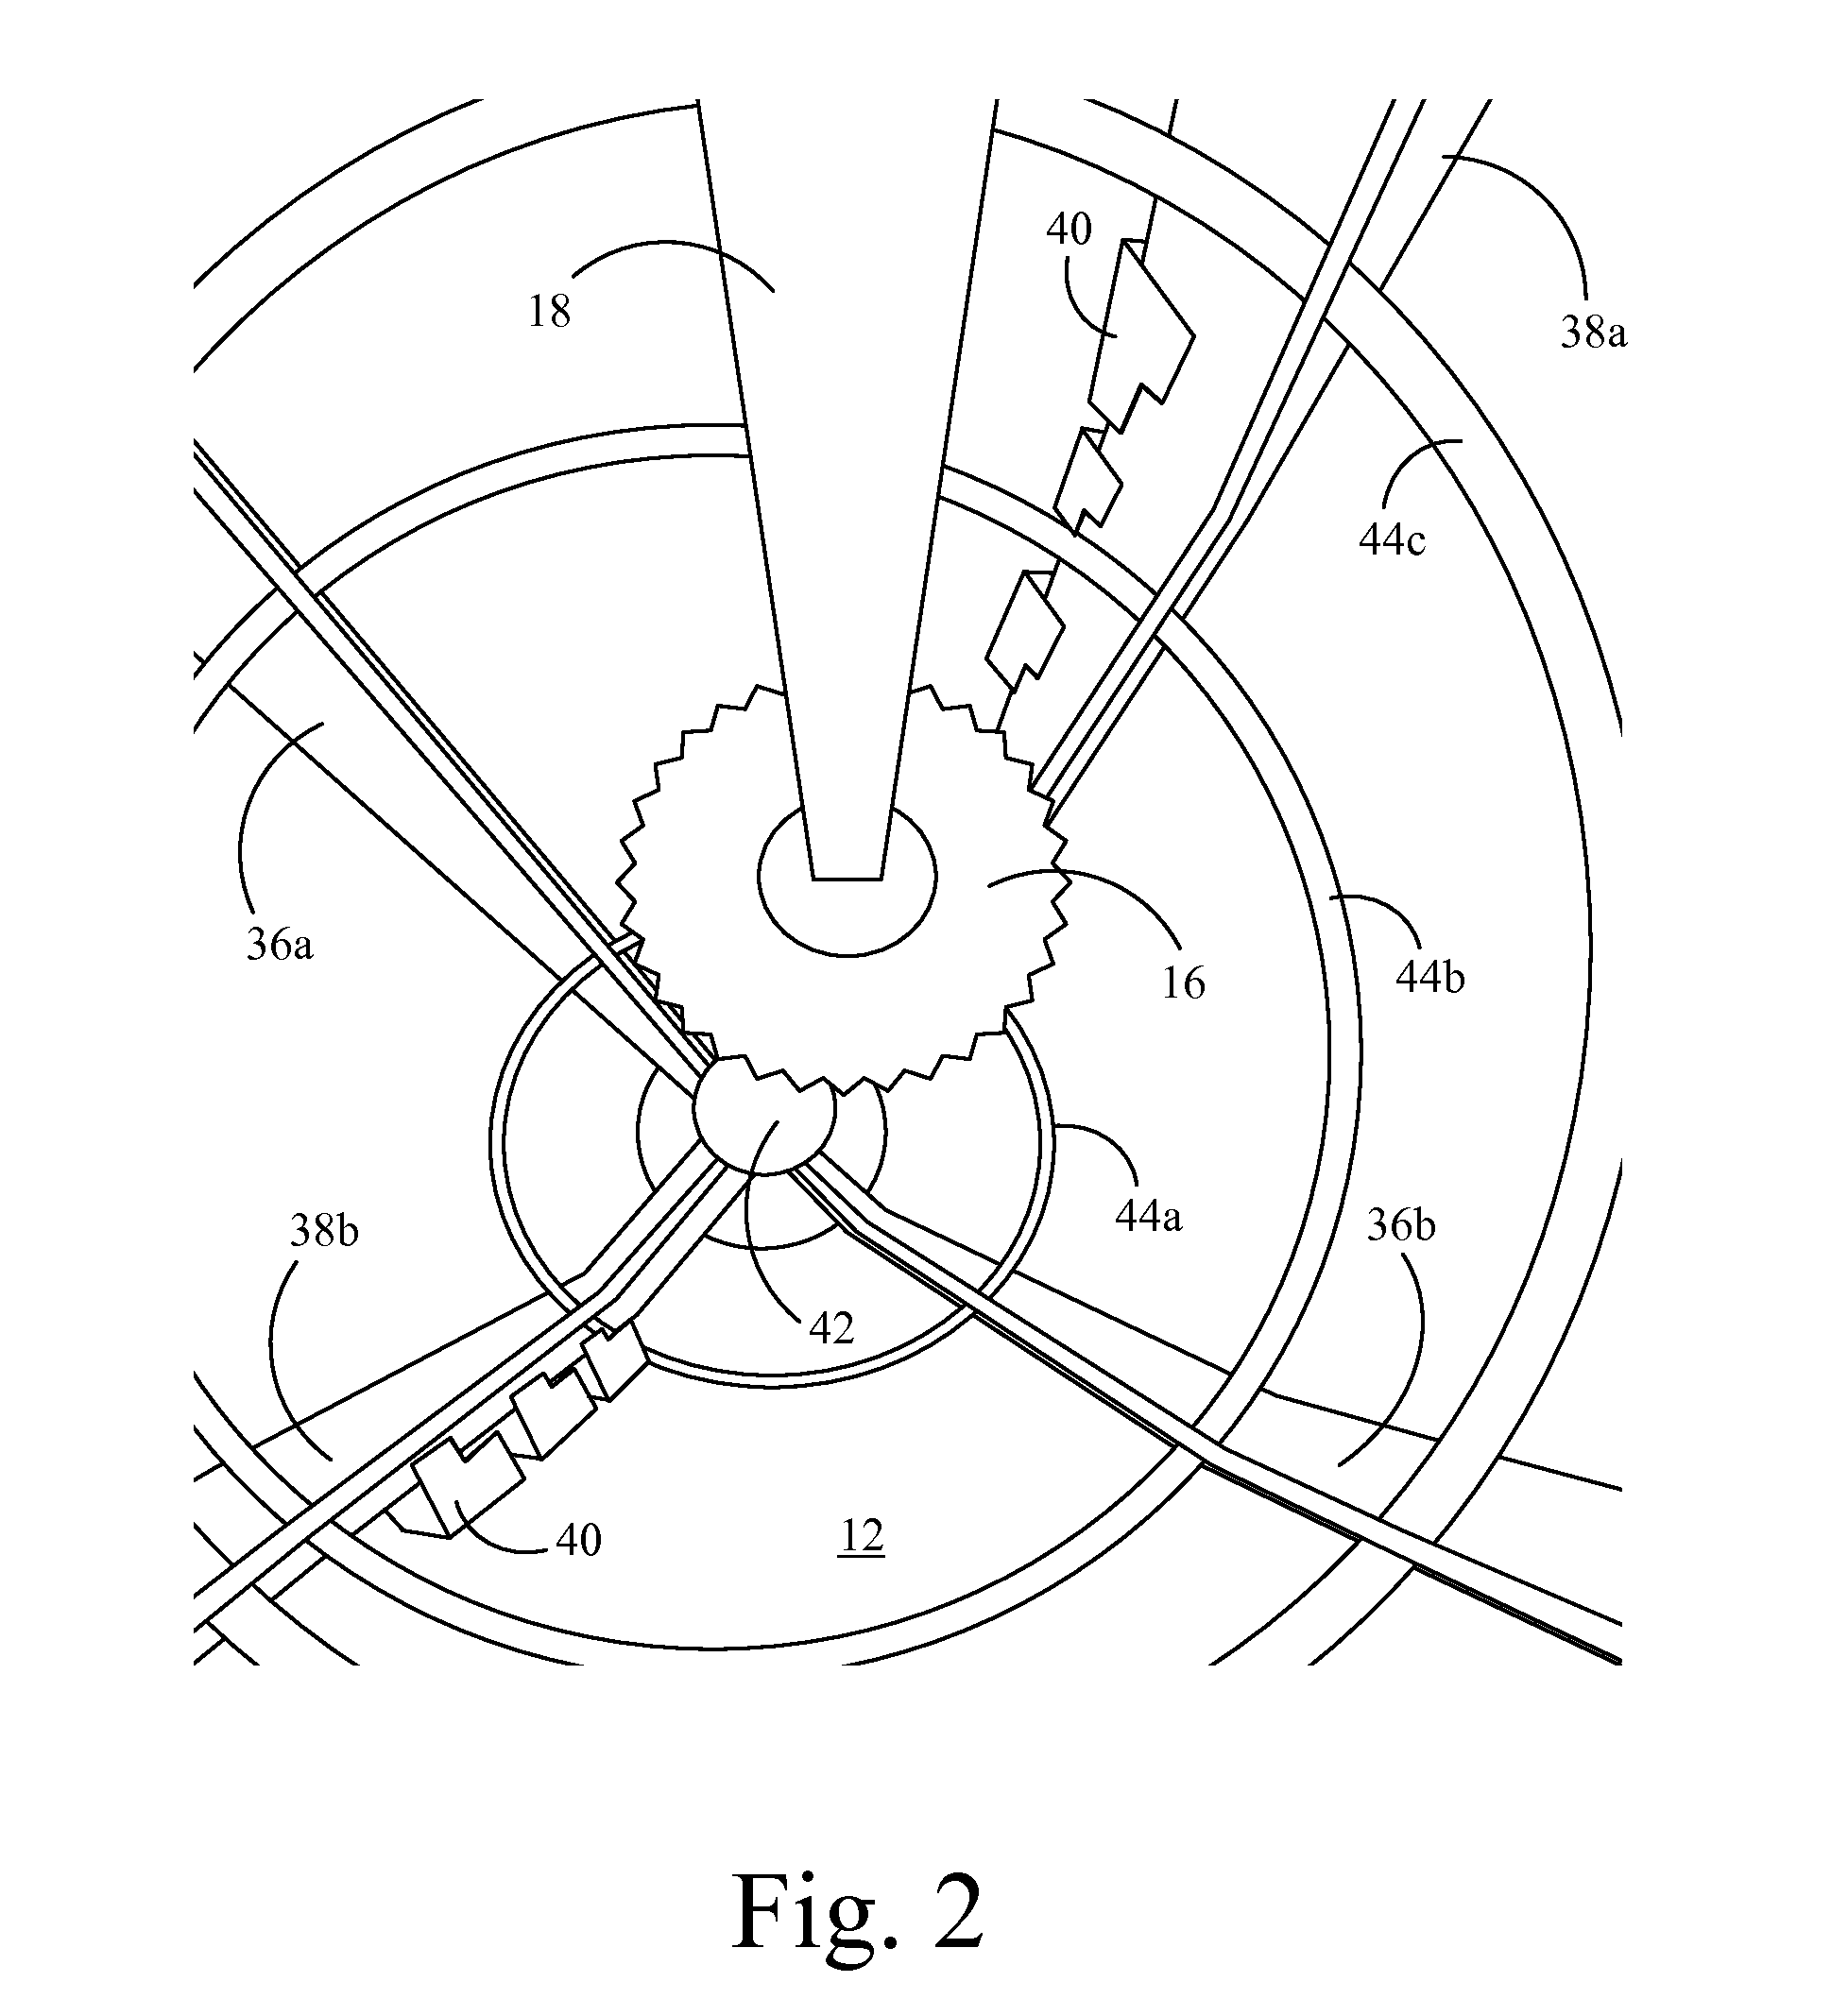 Method for Manufacturing a Gelled Fuel Heat Source